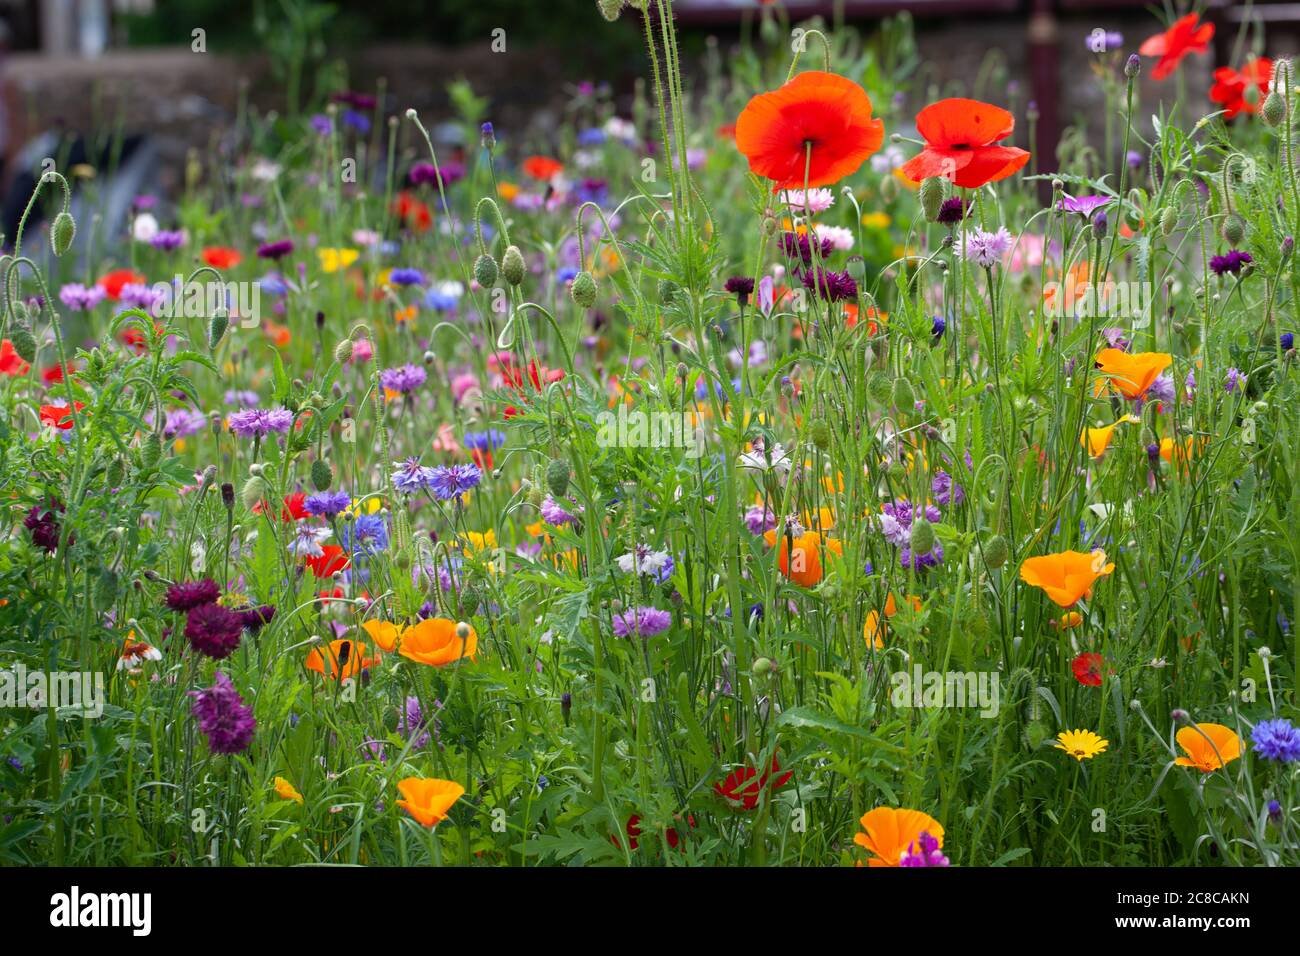 Nature Watch / Biodiversity concept - Close-up of wildflowers in bloom Stock Photo